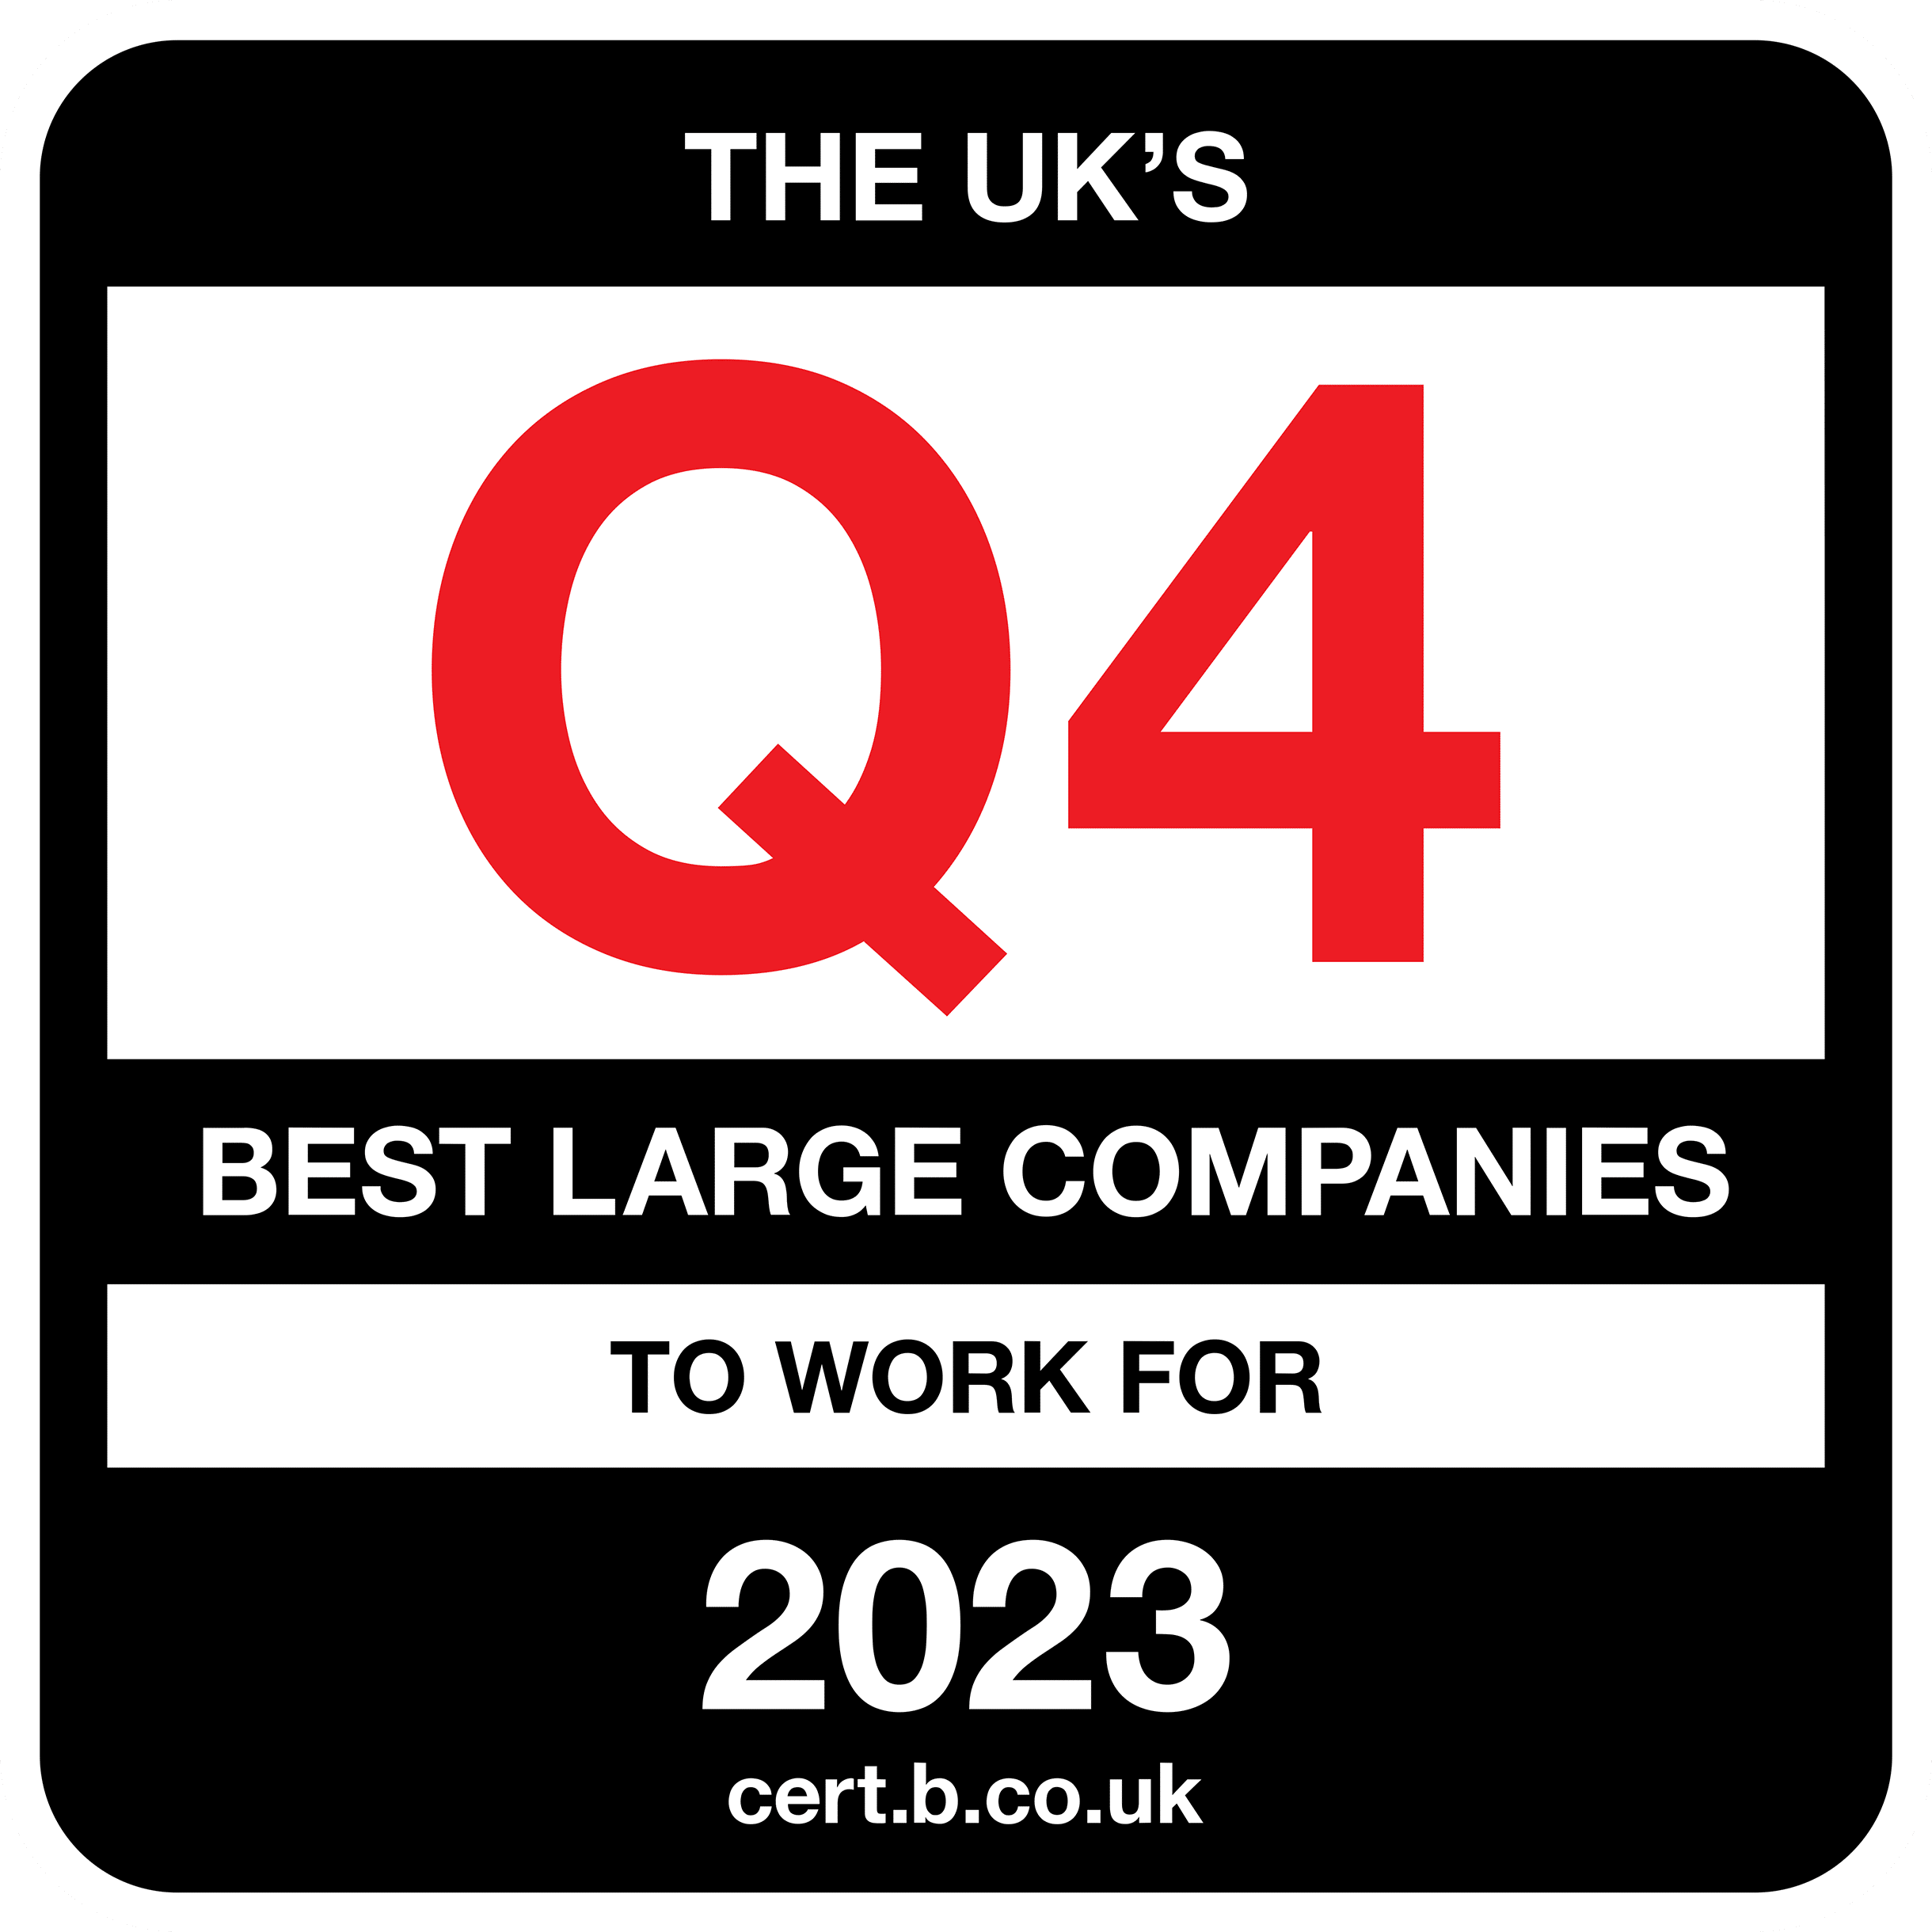 The UK's Q4 Best Large Companies to work for 2023